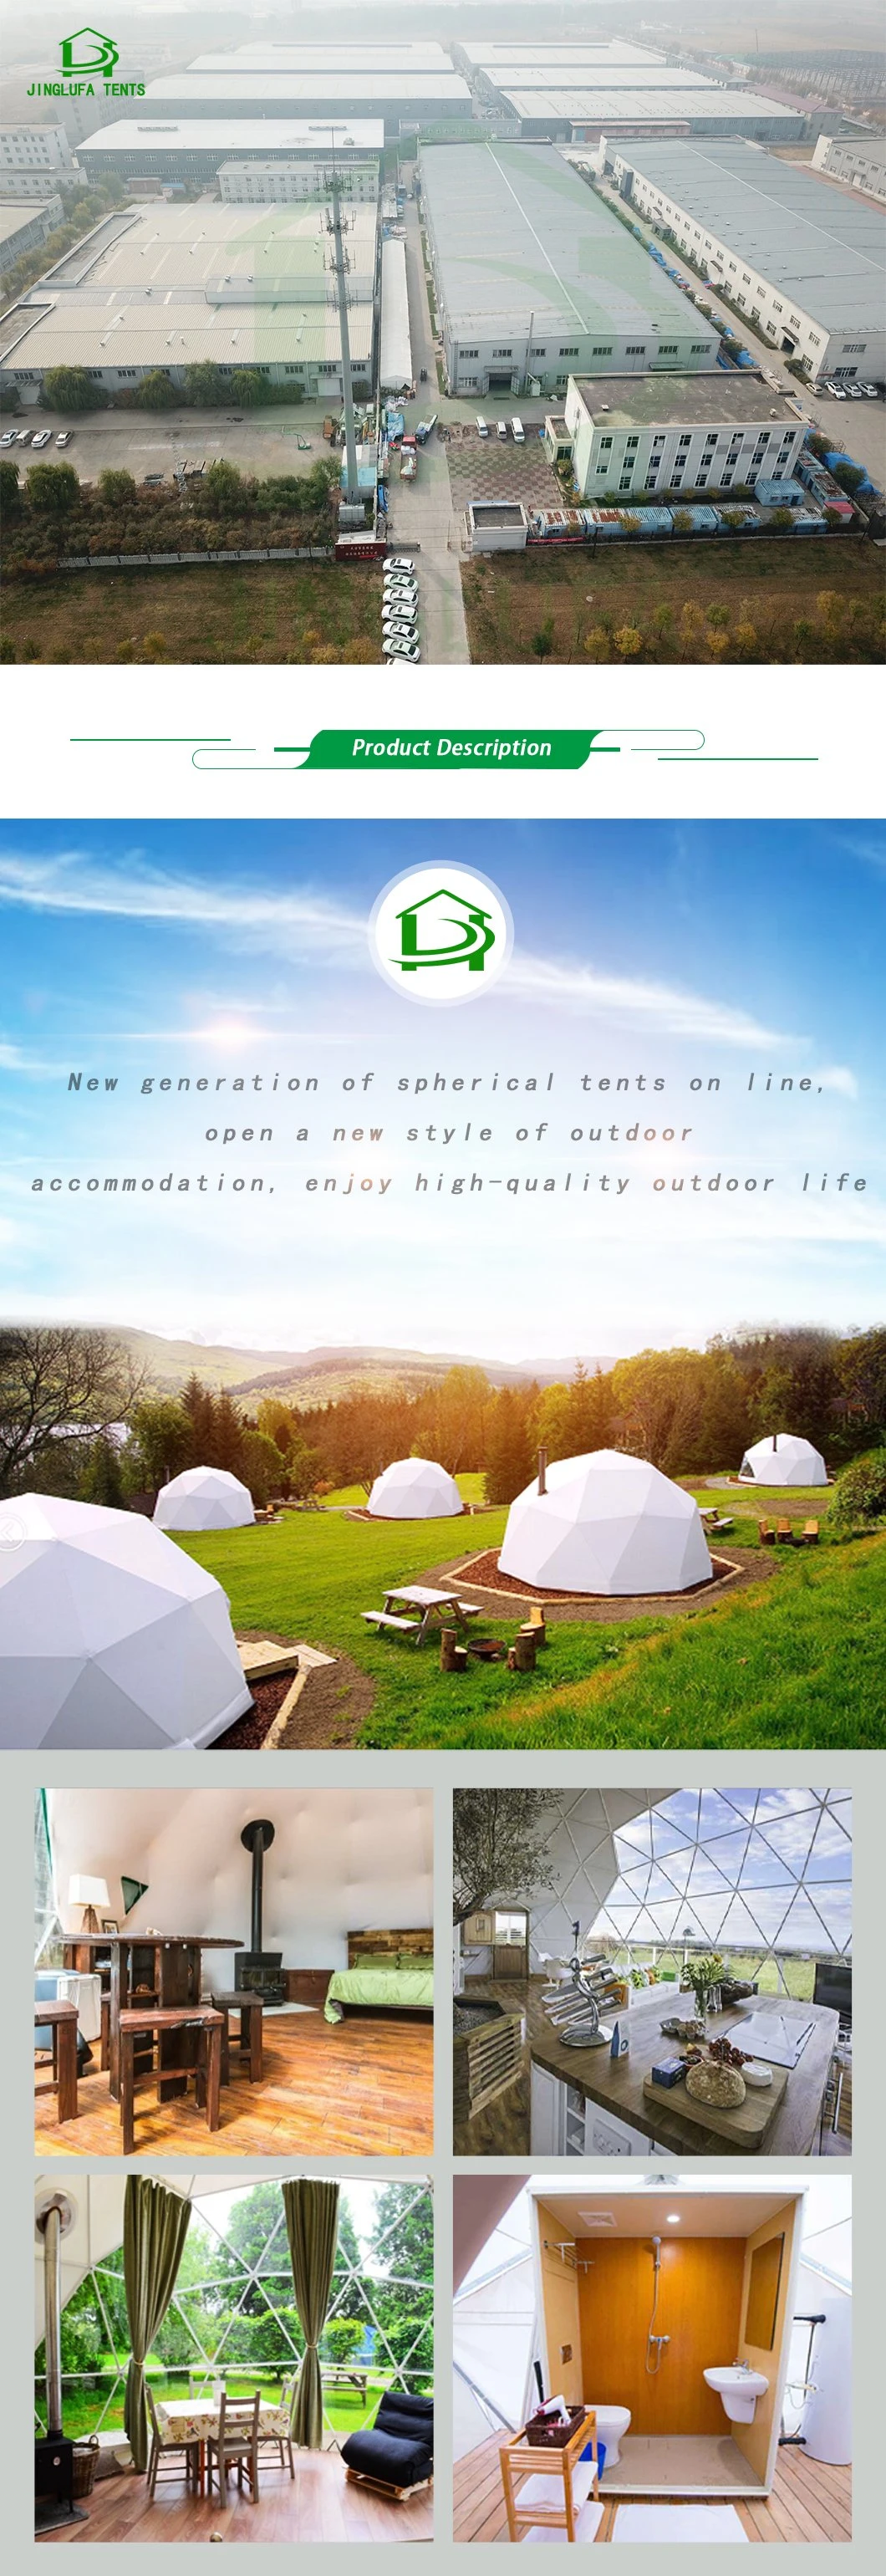 Geodetic Luxury Aluminum Frame Hotel Dome Tent Glamping